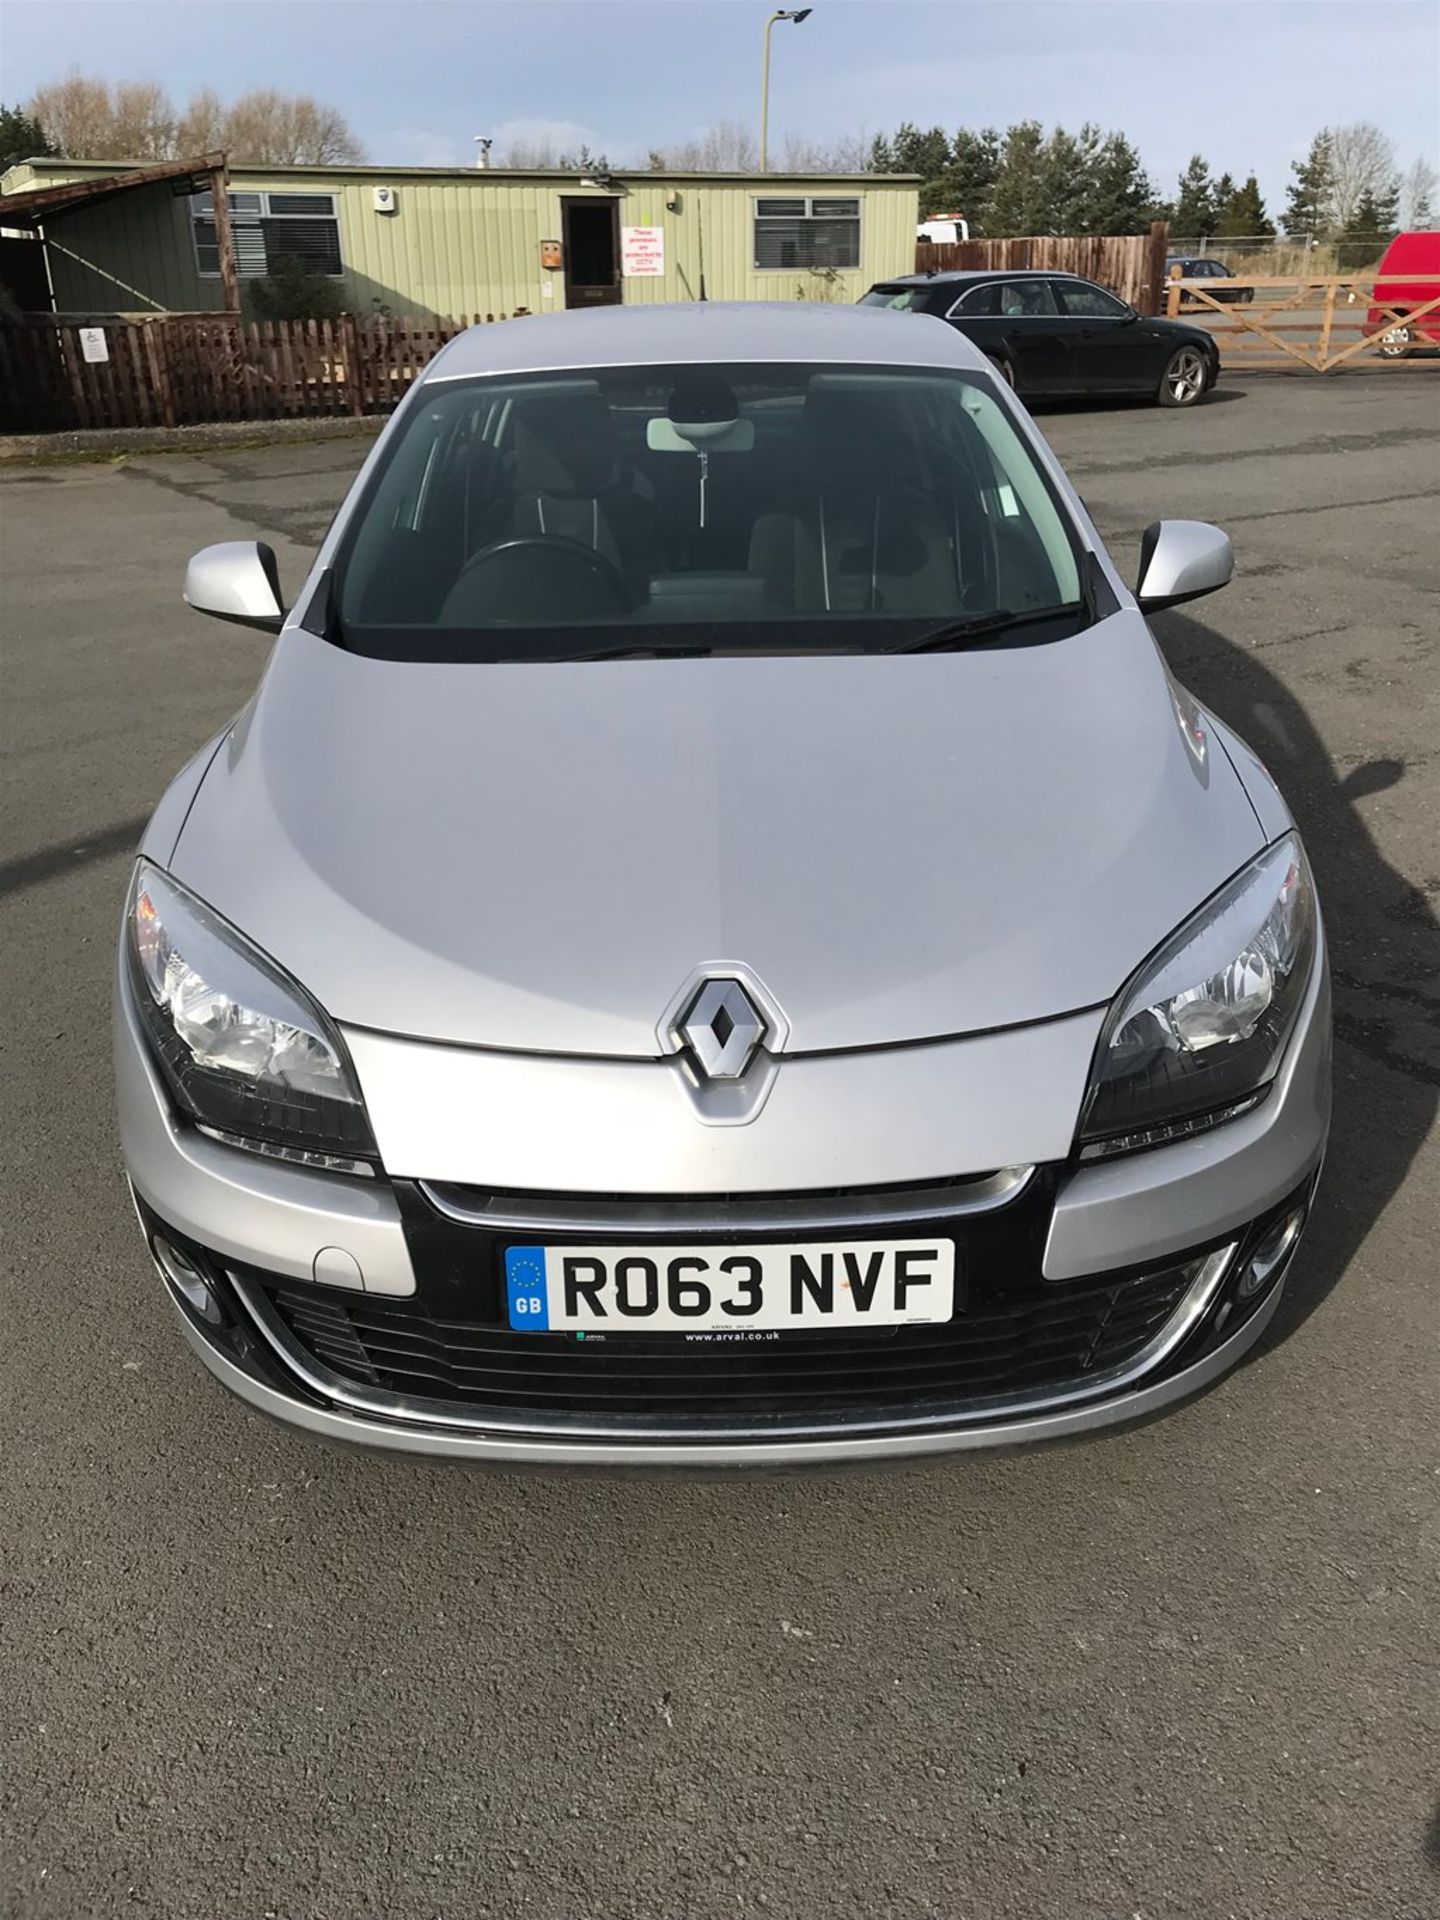 Renault Megane 1.5 dCi Limited Energy 110ps 5dr - Image 2 of 8